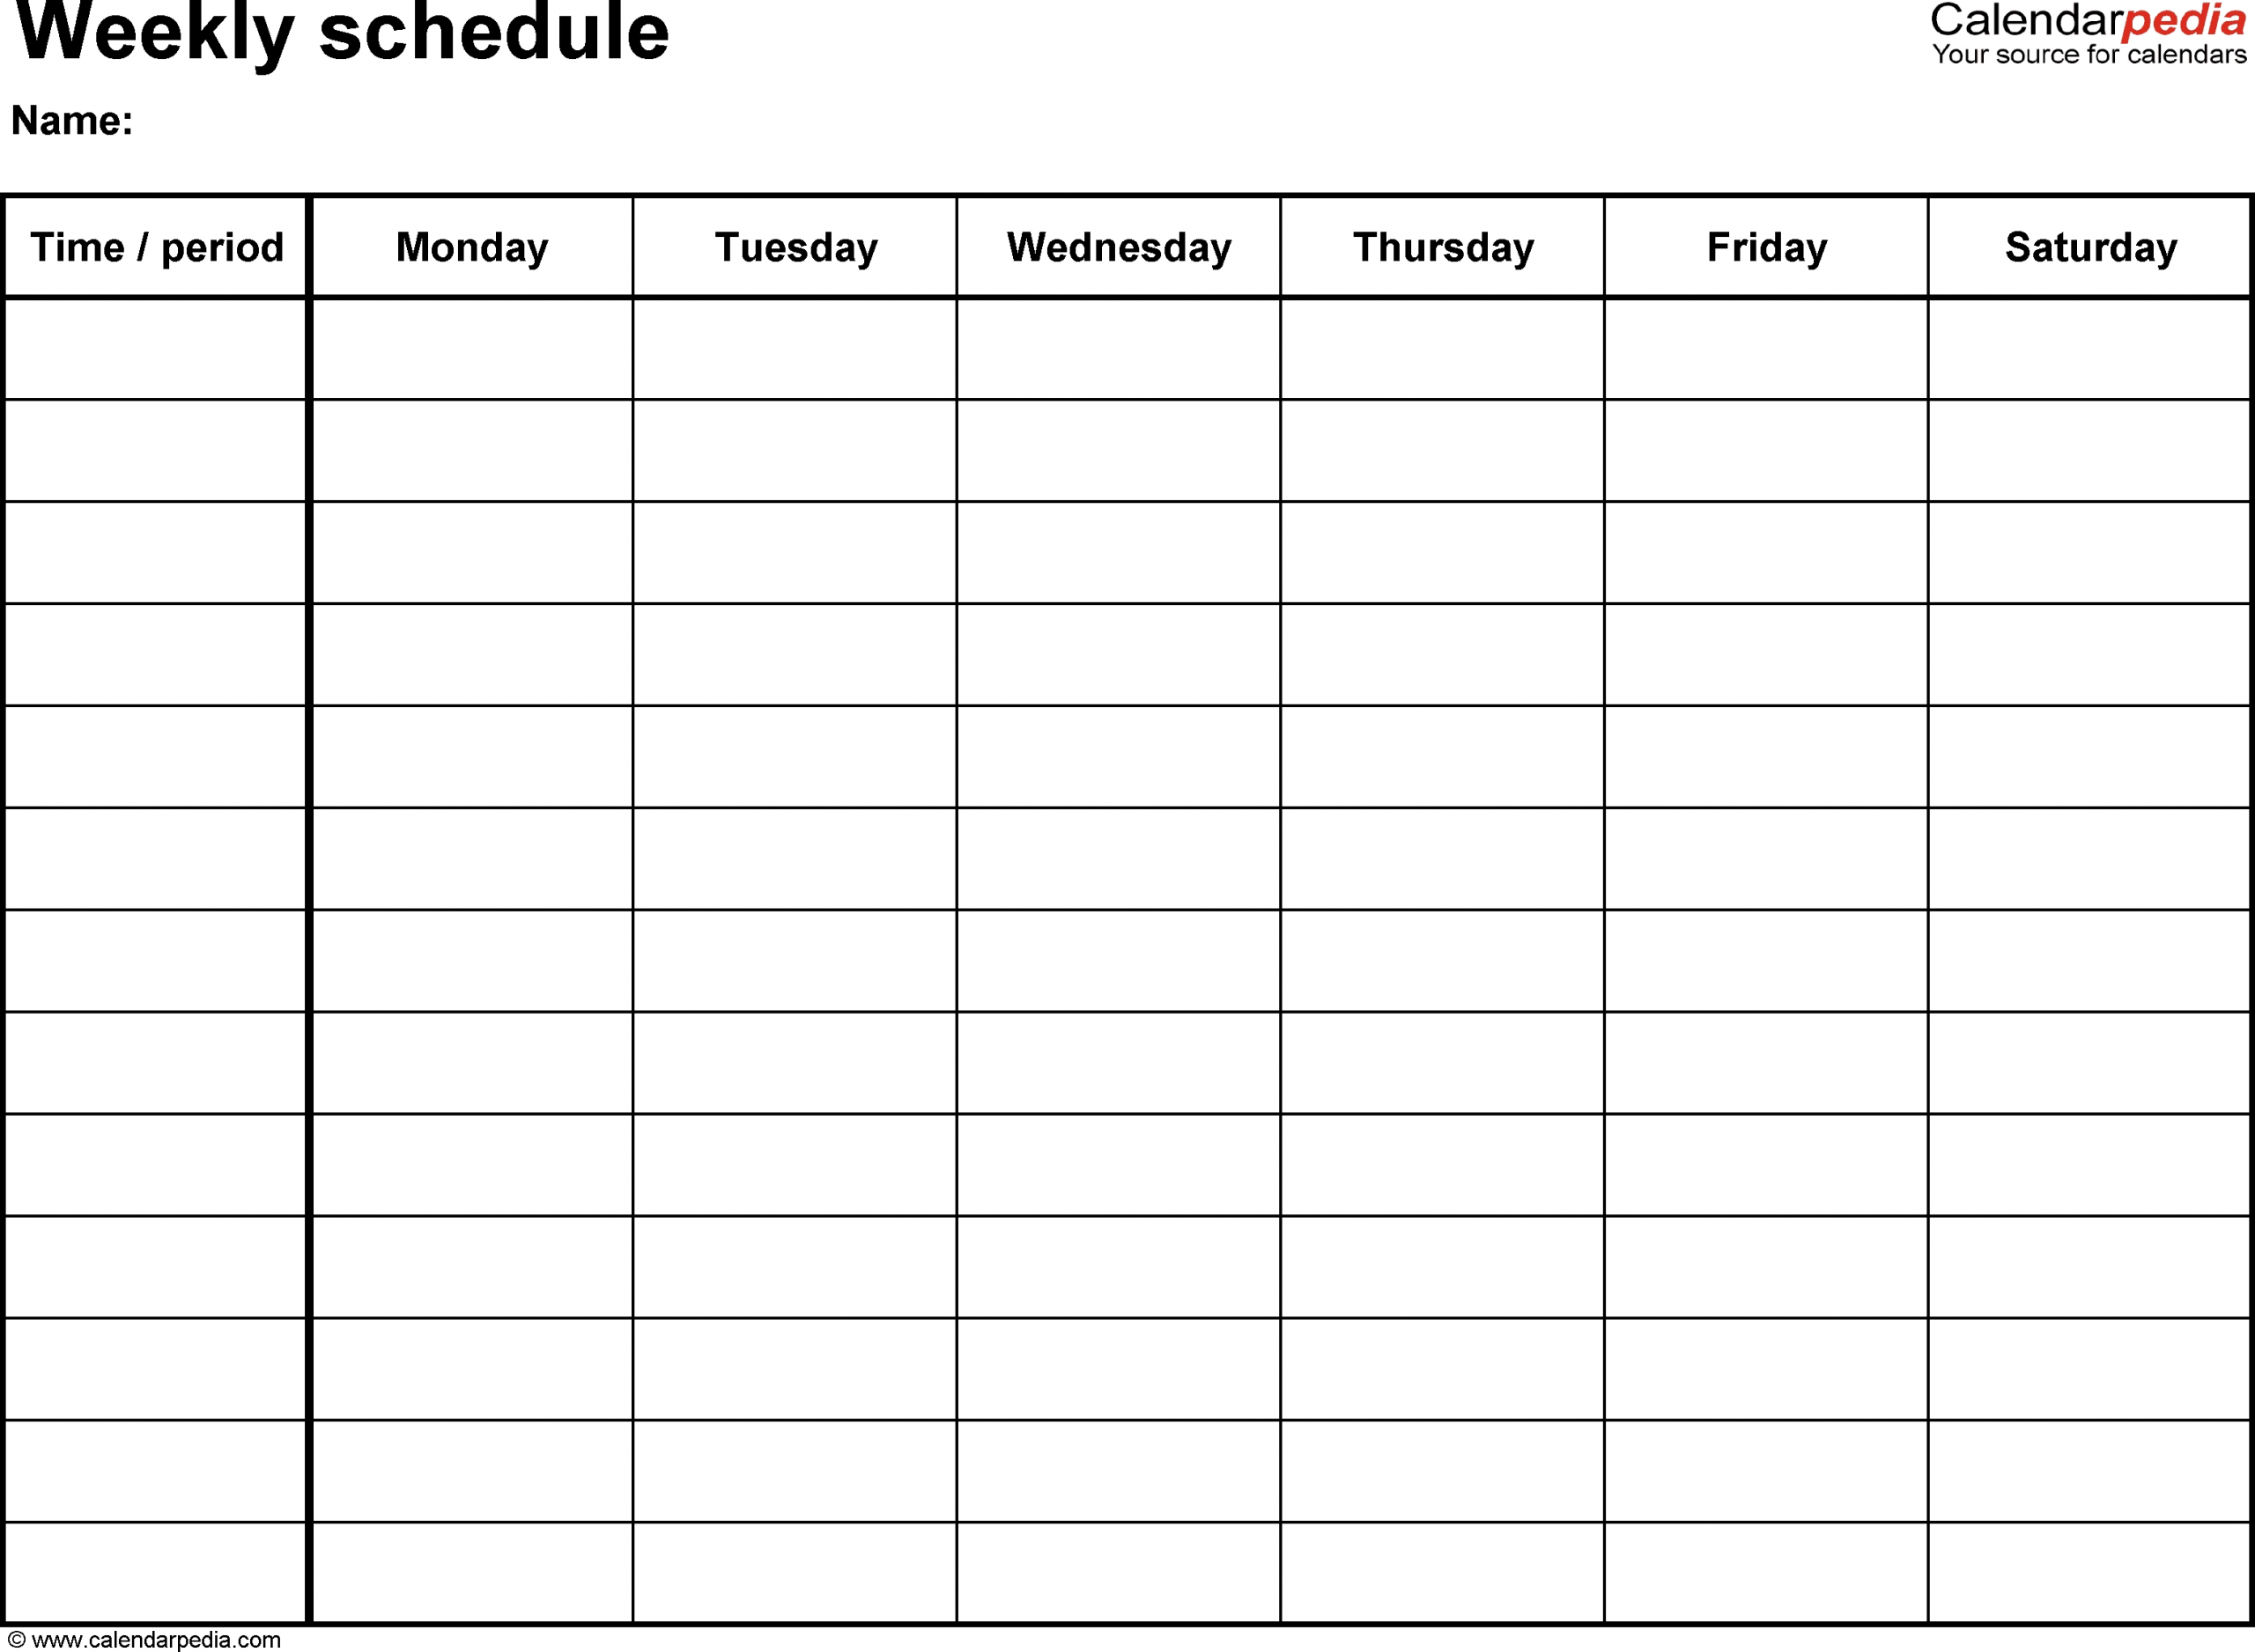 Free Weekly Schedule Templates For Excel - 18 Templates 6 Week Calendar Template Excel